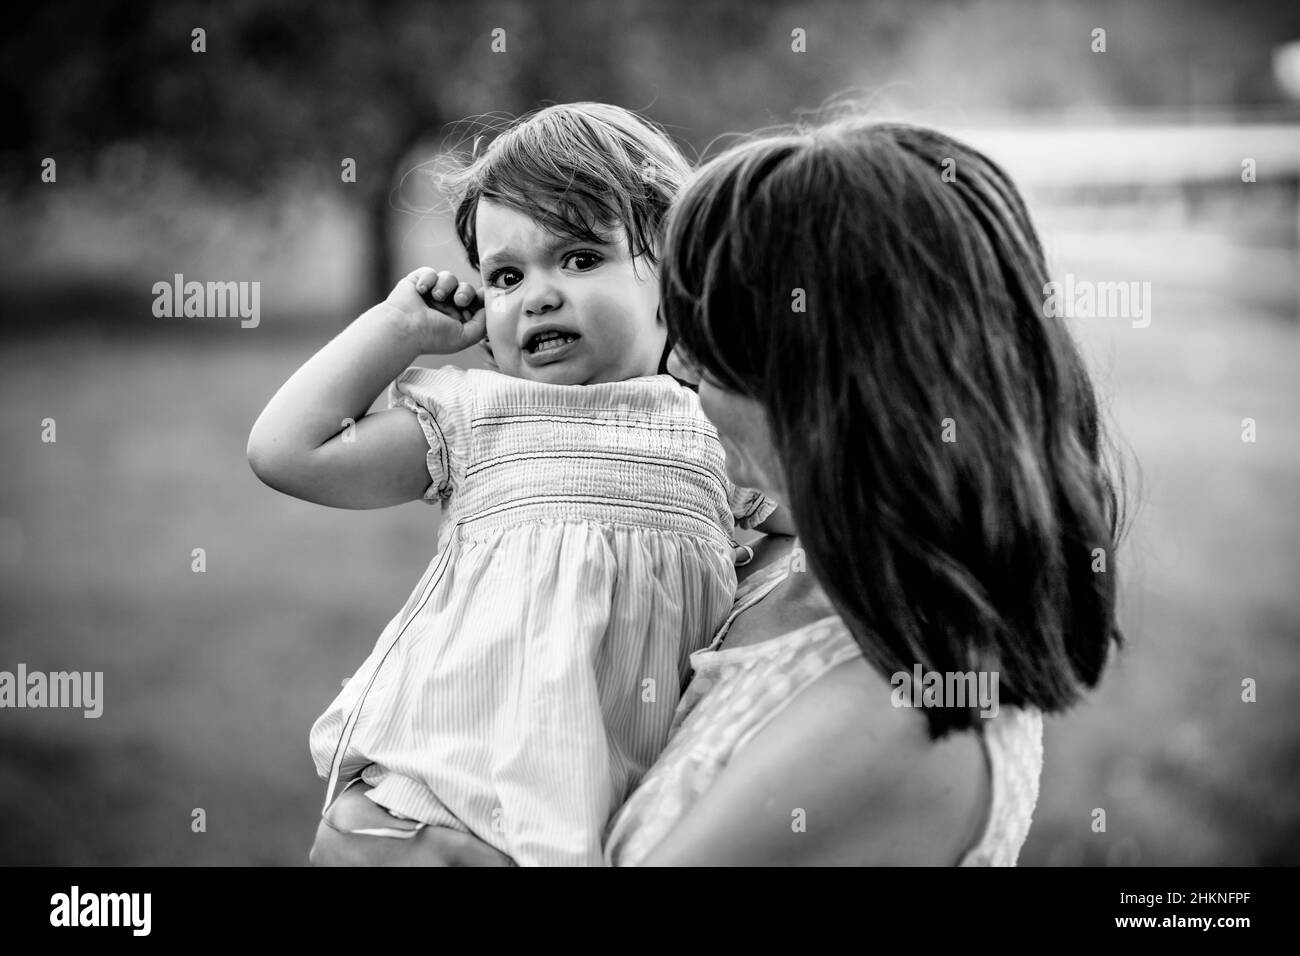 Cry baby Black and White Stock Photos & Images - Alamy